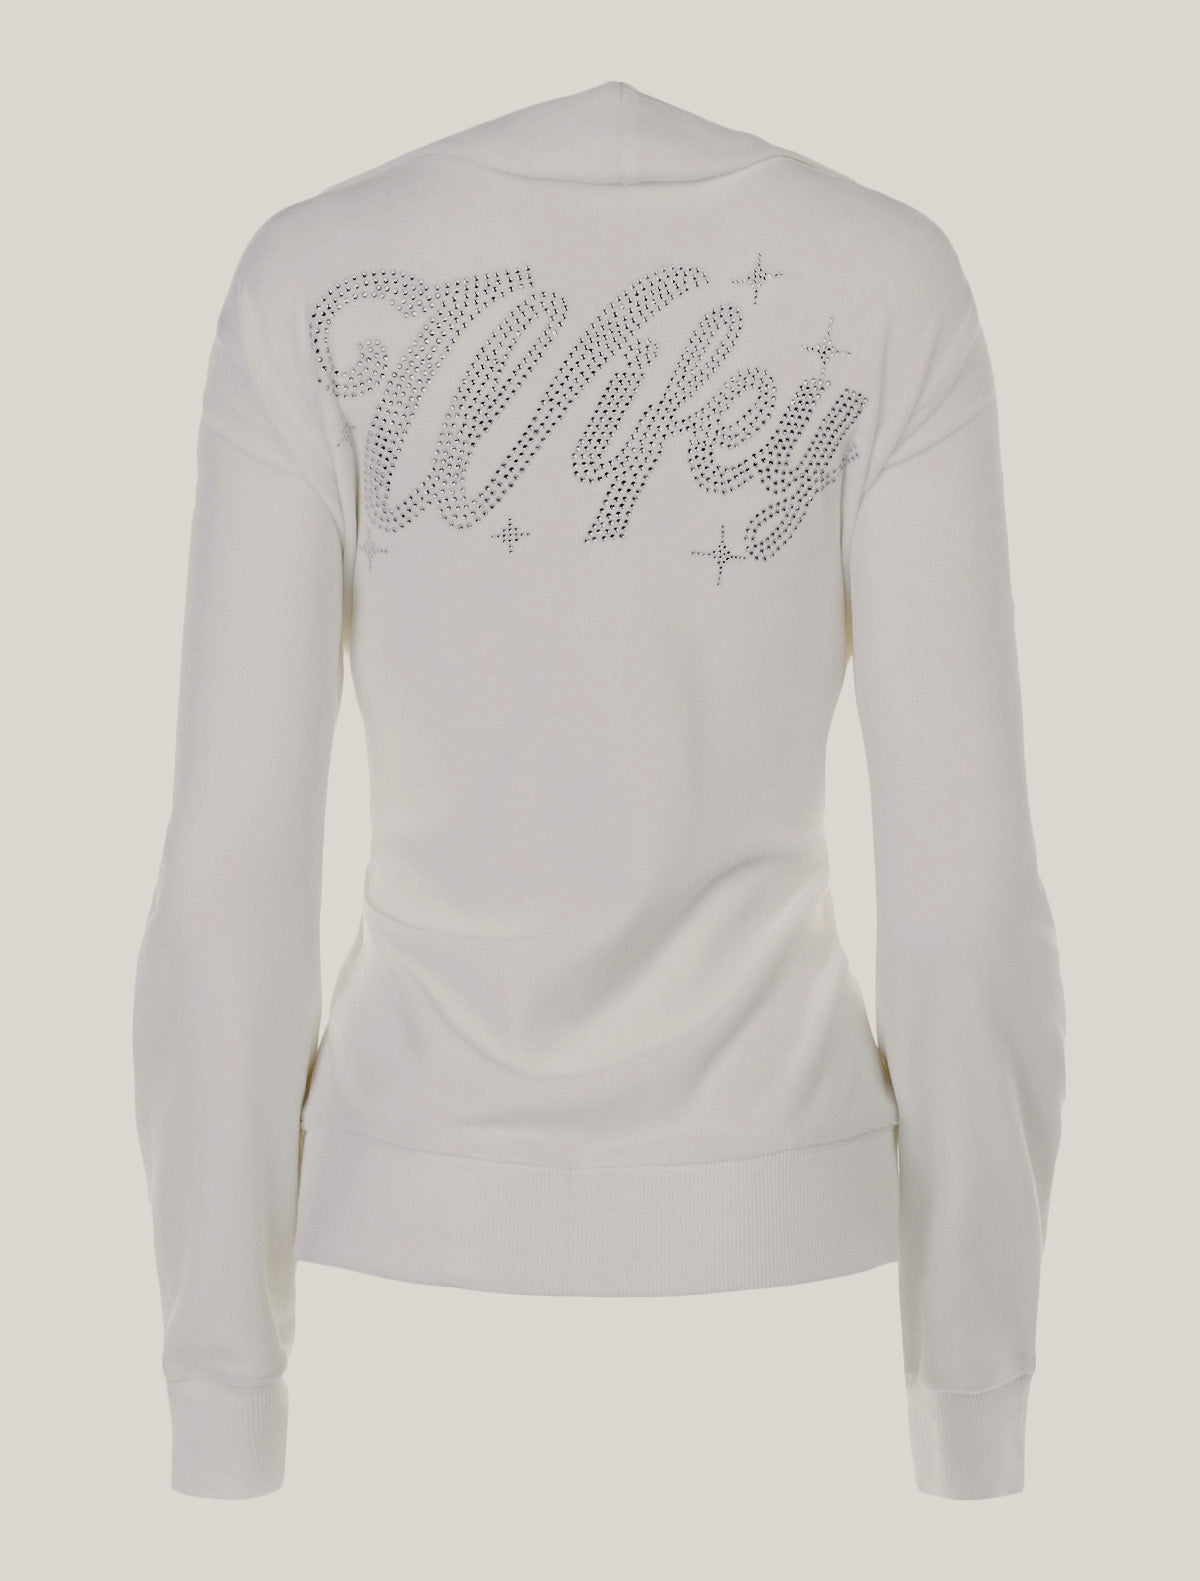 Wifey for Lifey Hoodie by Paris Hilton Tracksuits